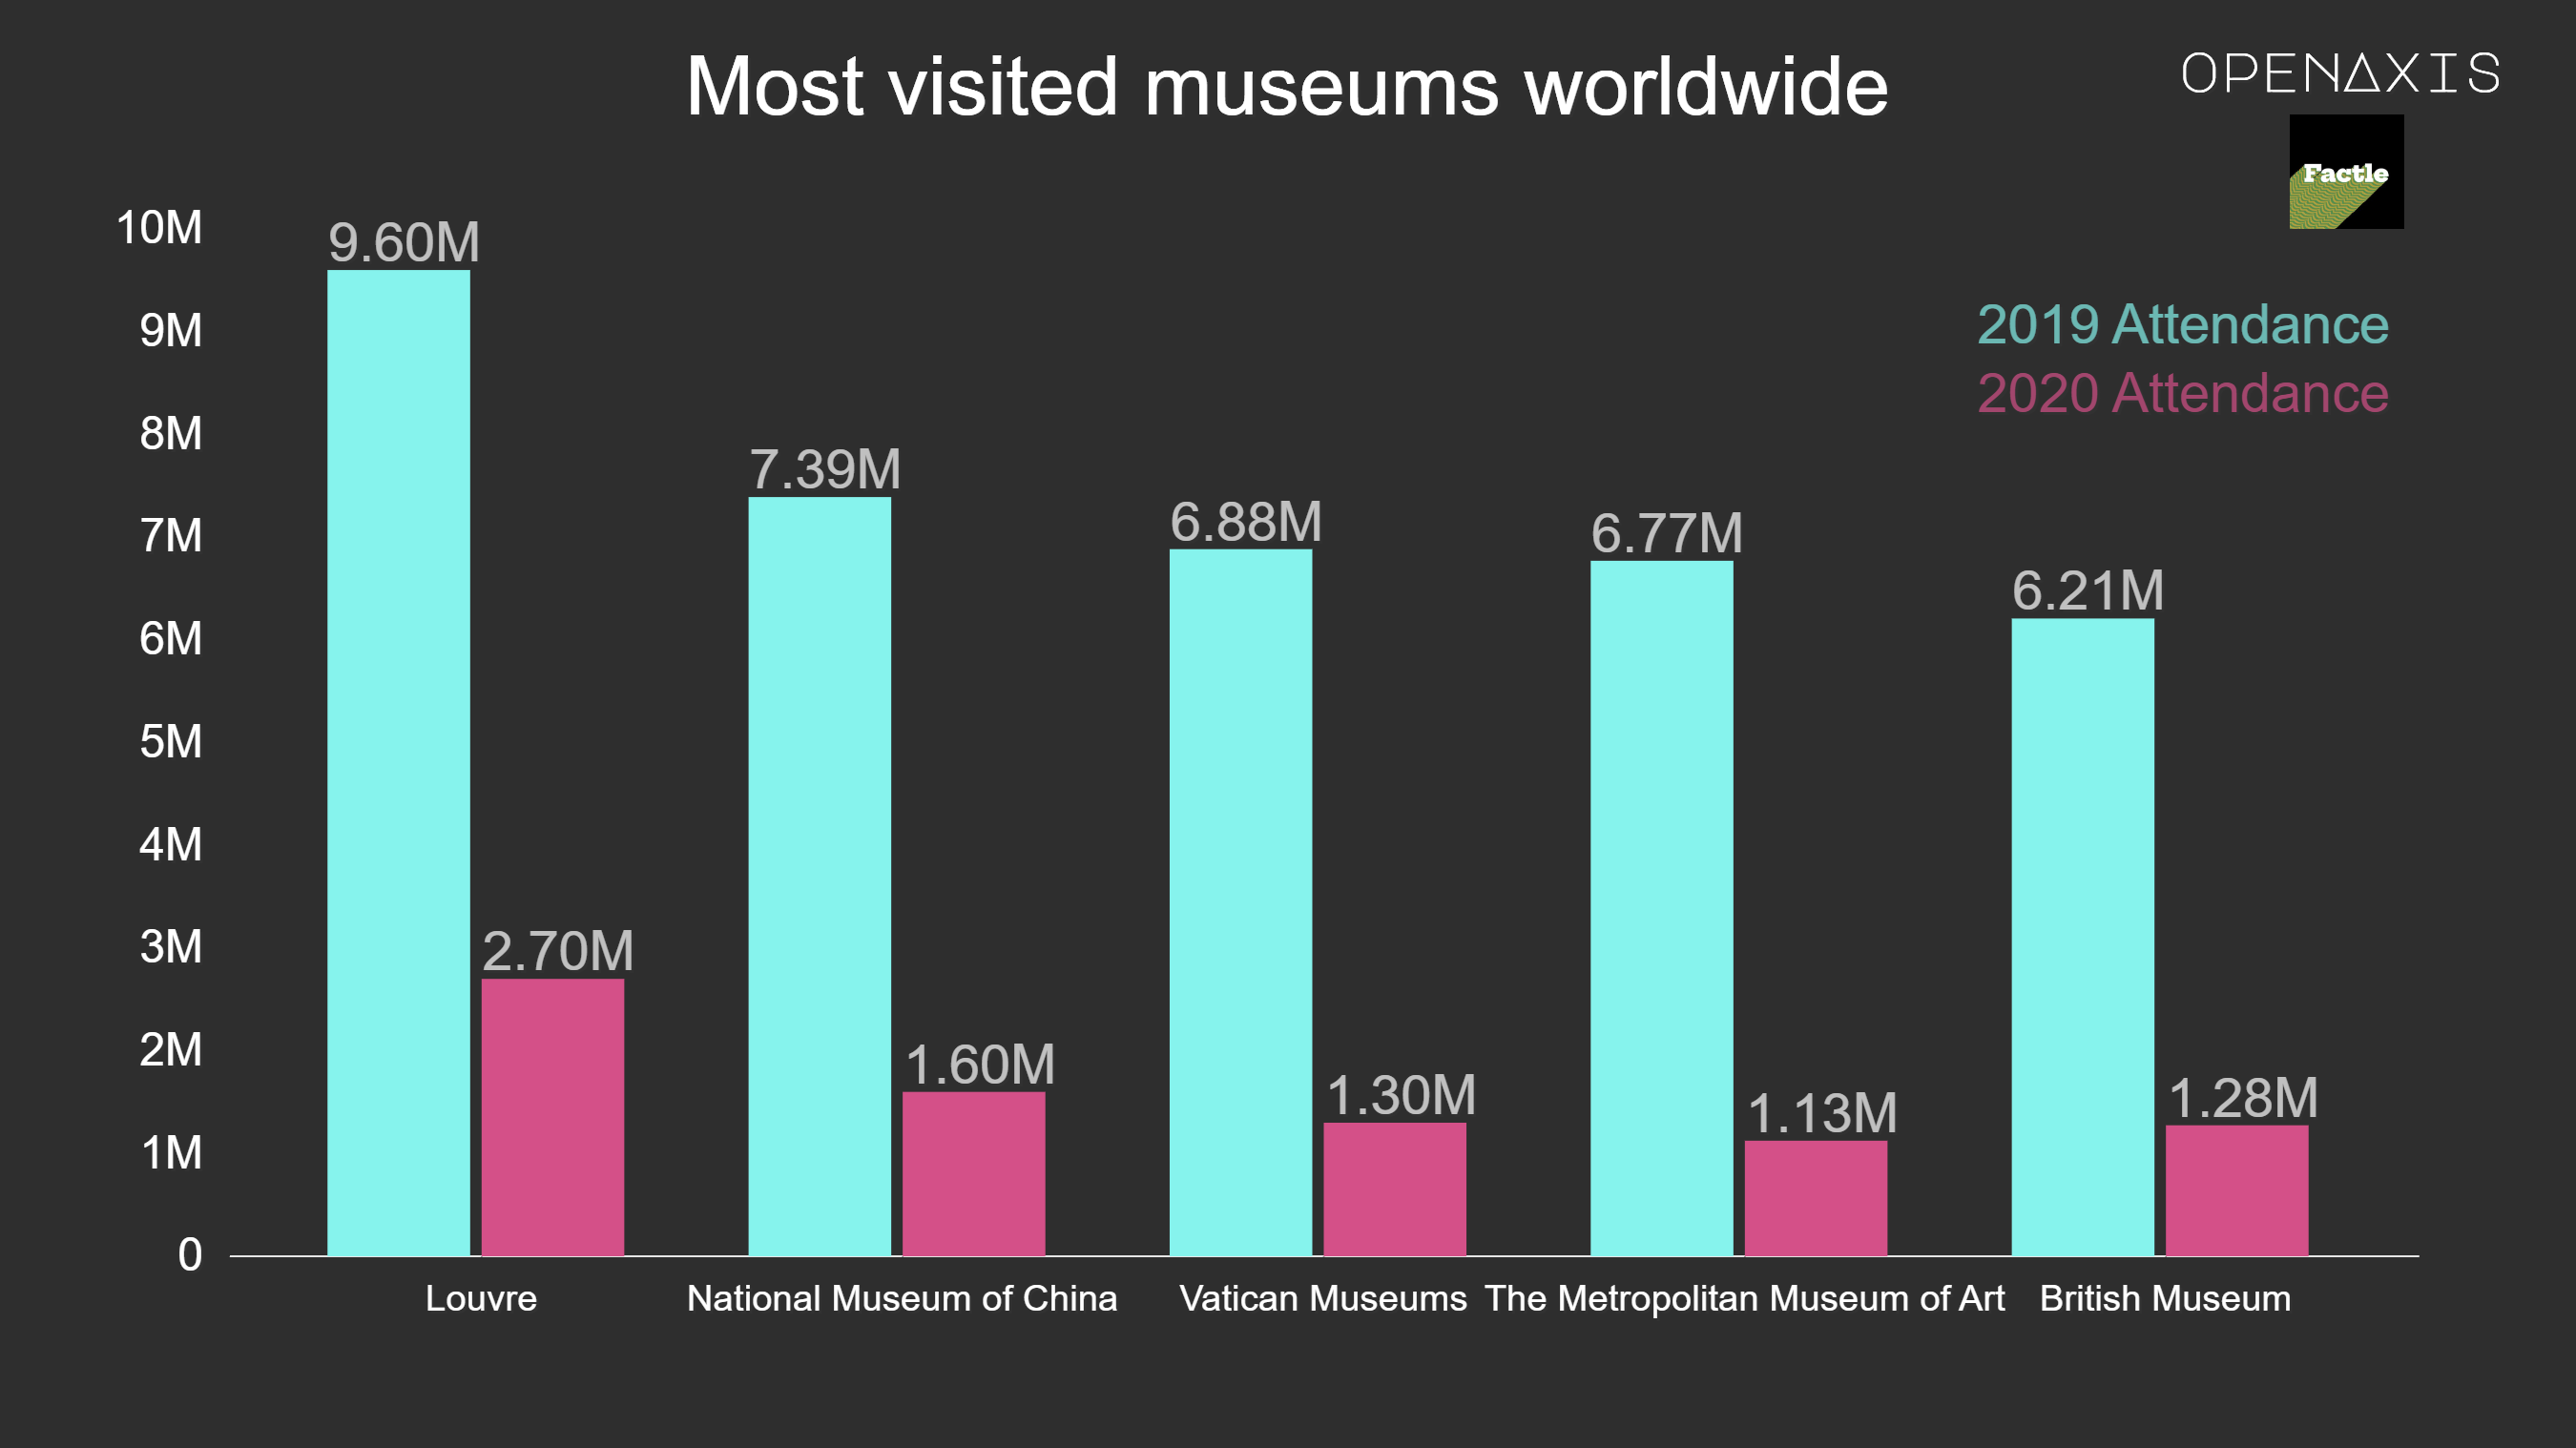 "Most visited museums worldwide"